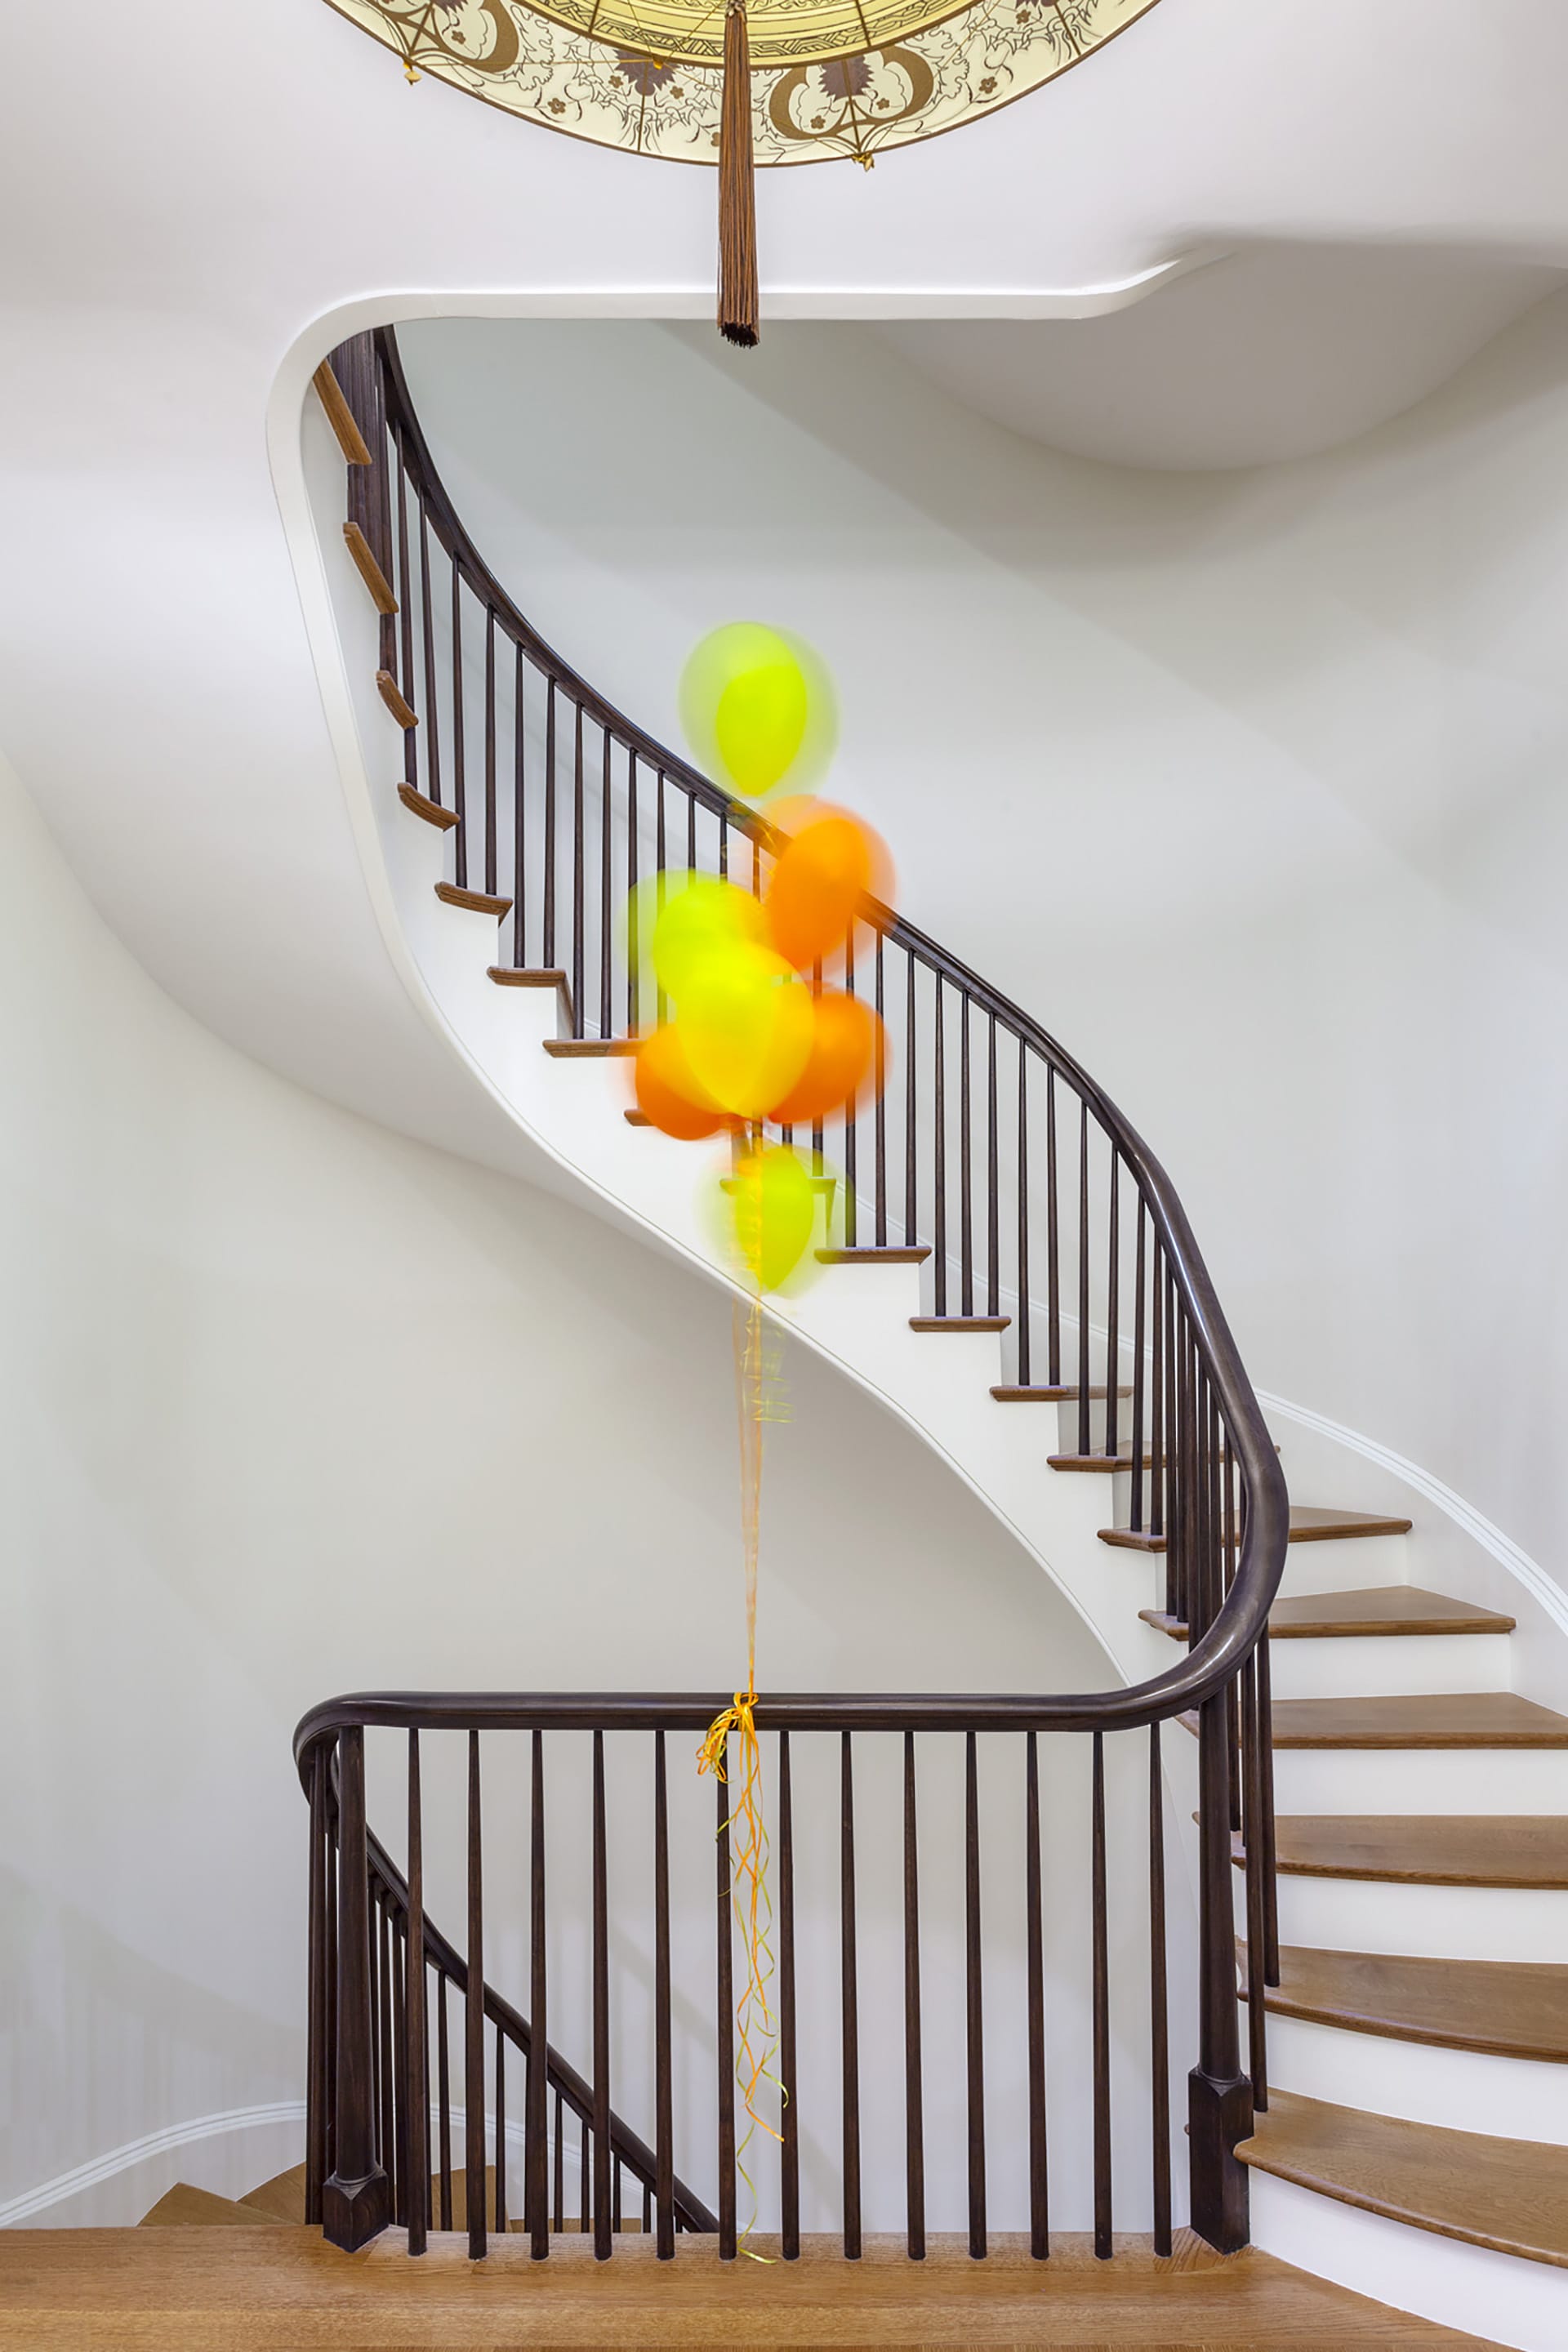 Sculptural staircase with an antique chandelier and a group of balloons ascending the space in the middle.